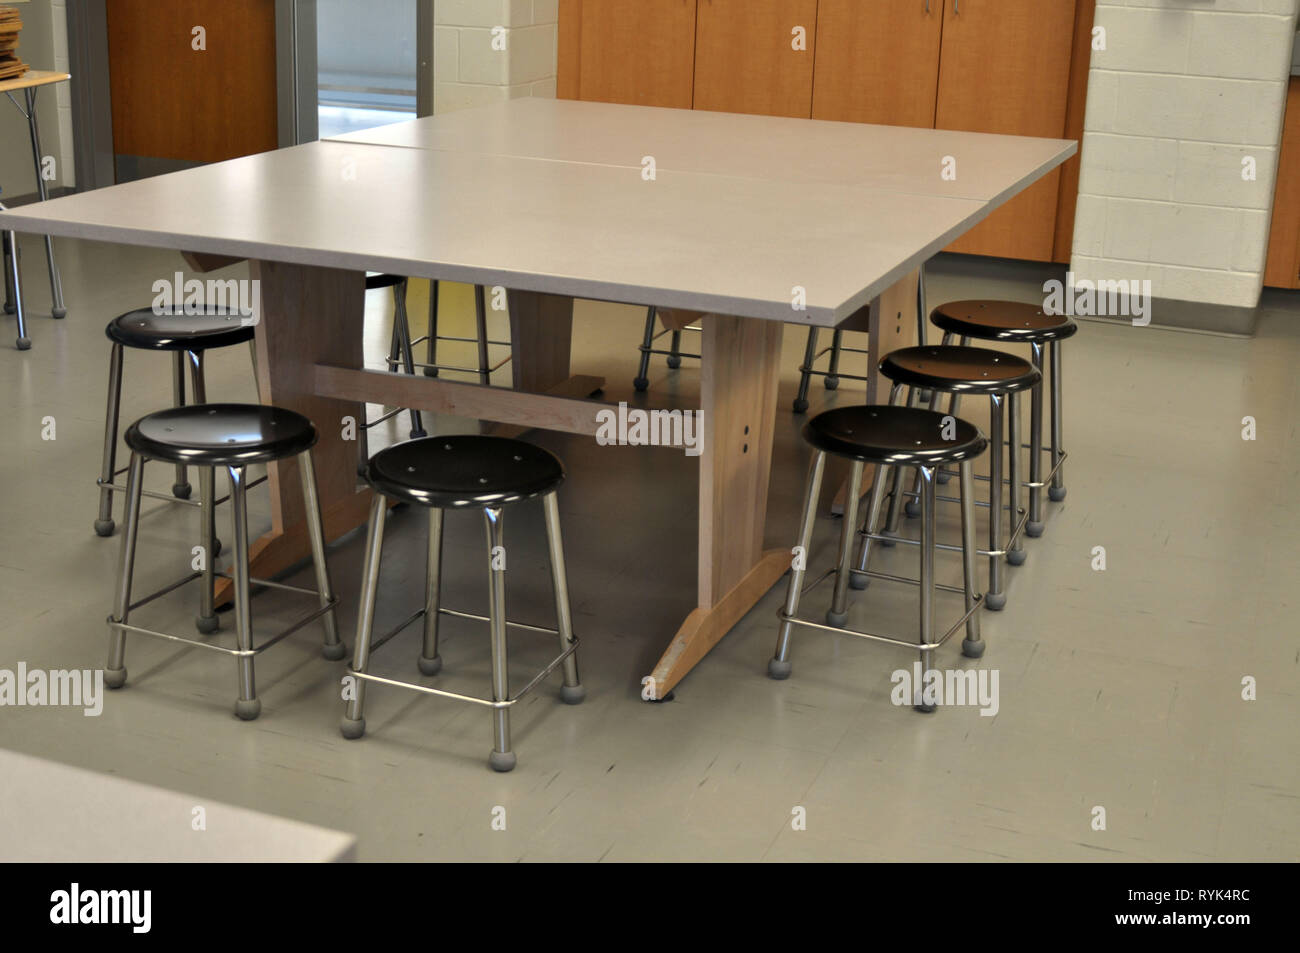 A Large Table with Stools all around on the Interior of an Art Classroom Stock Photo